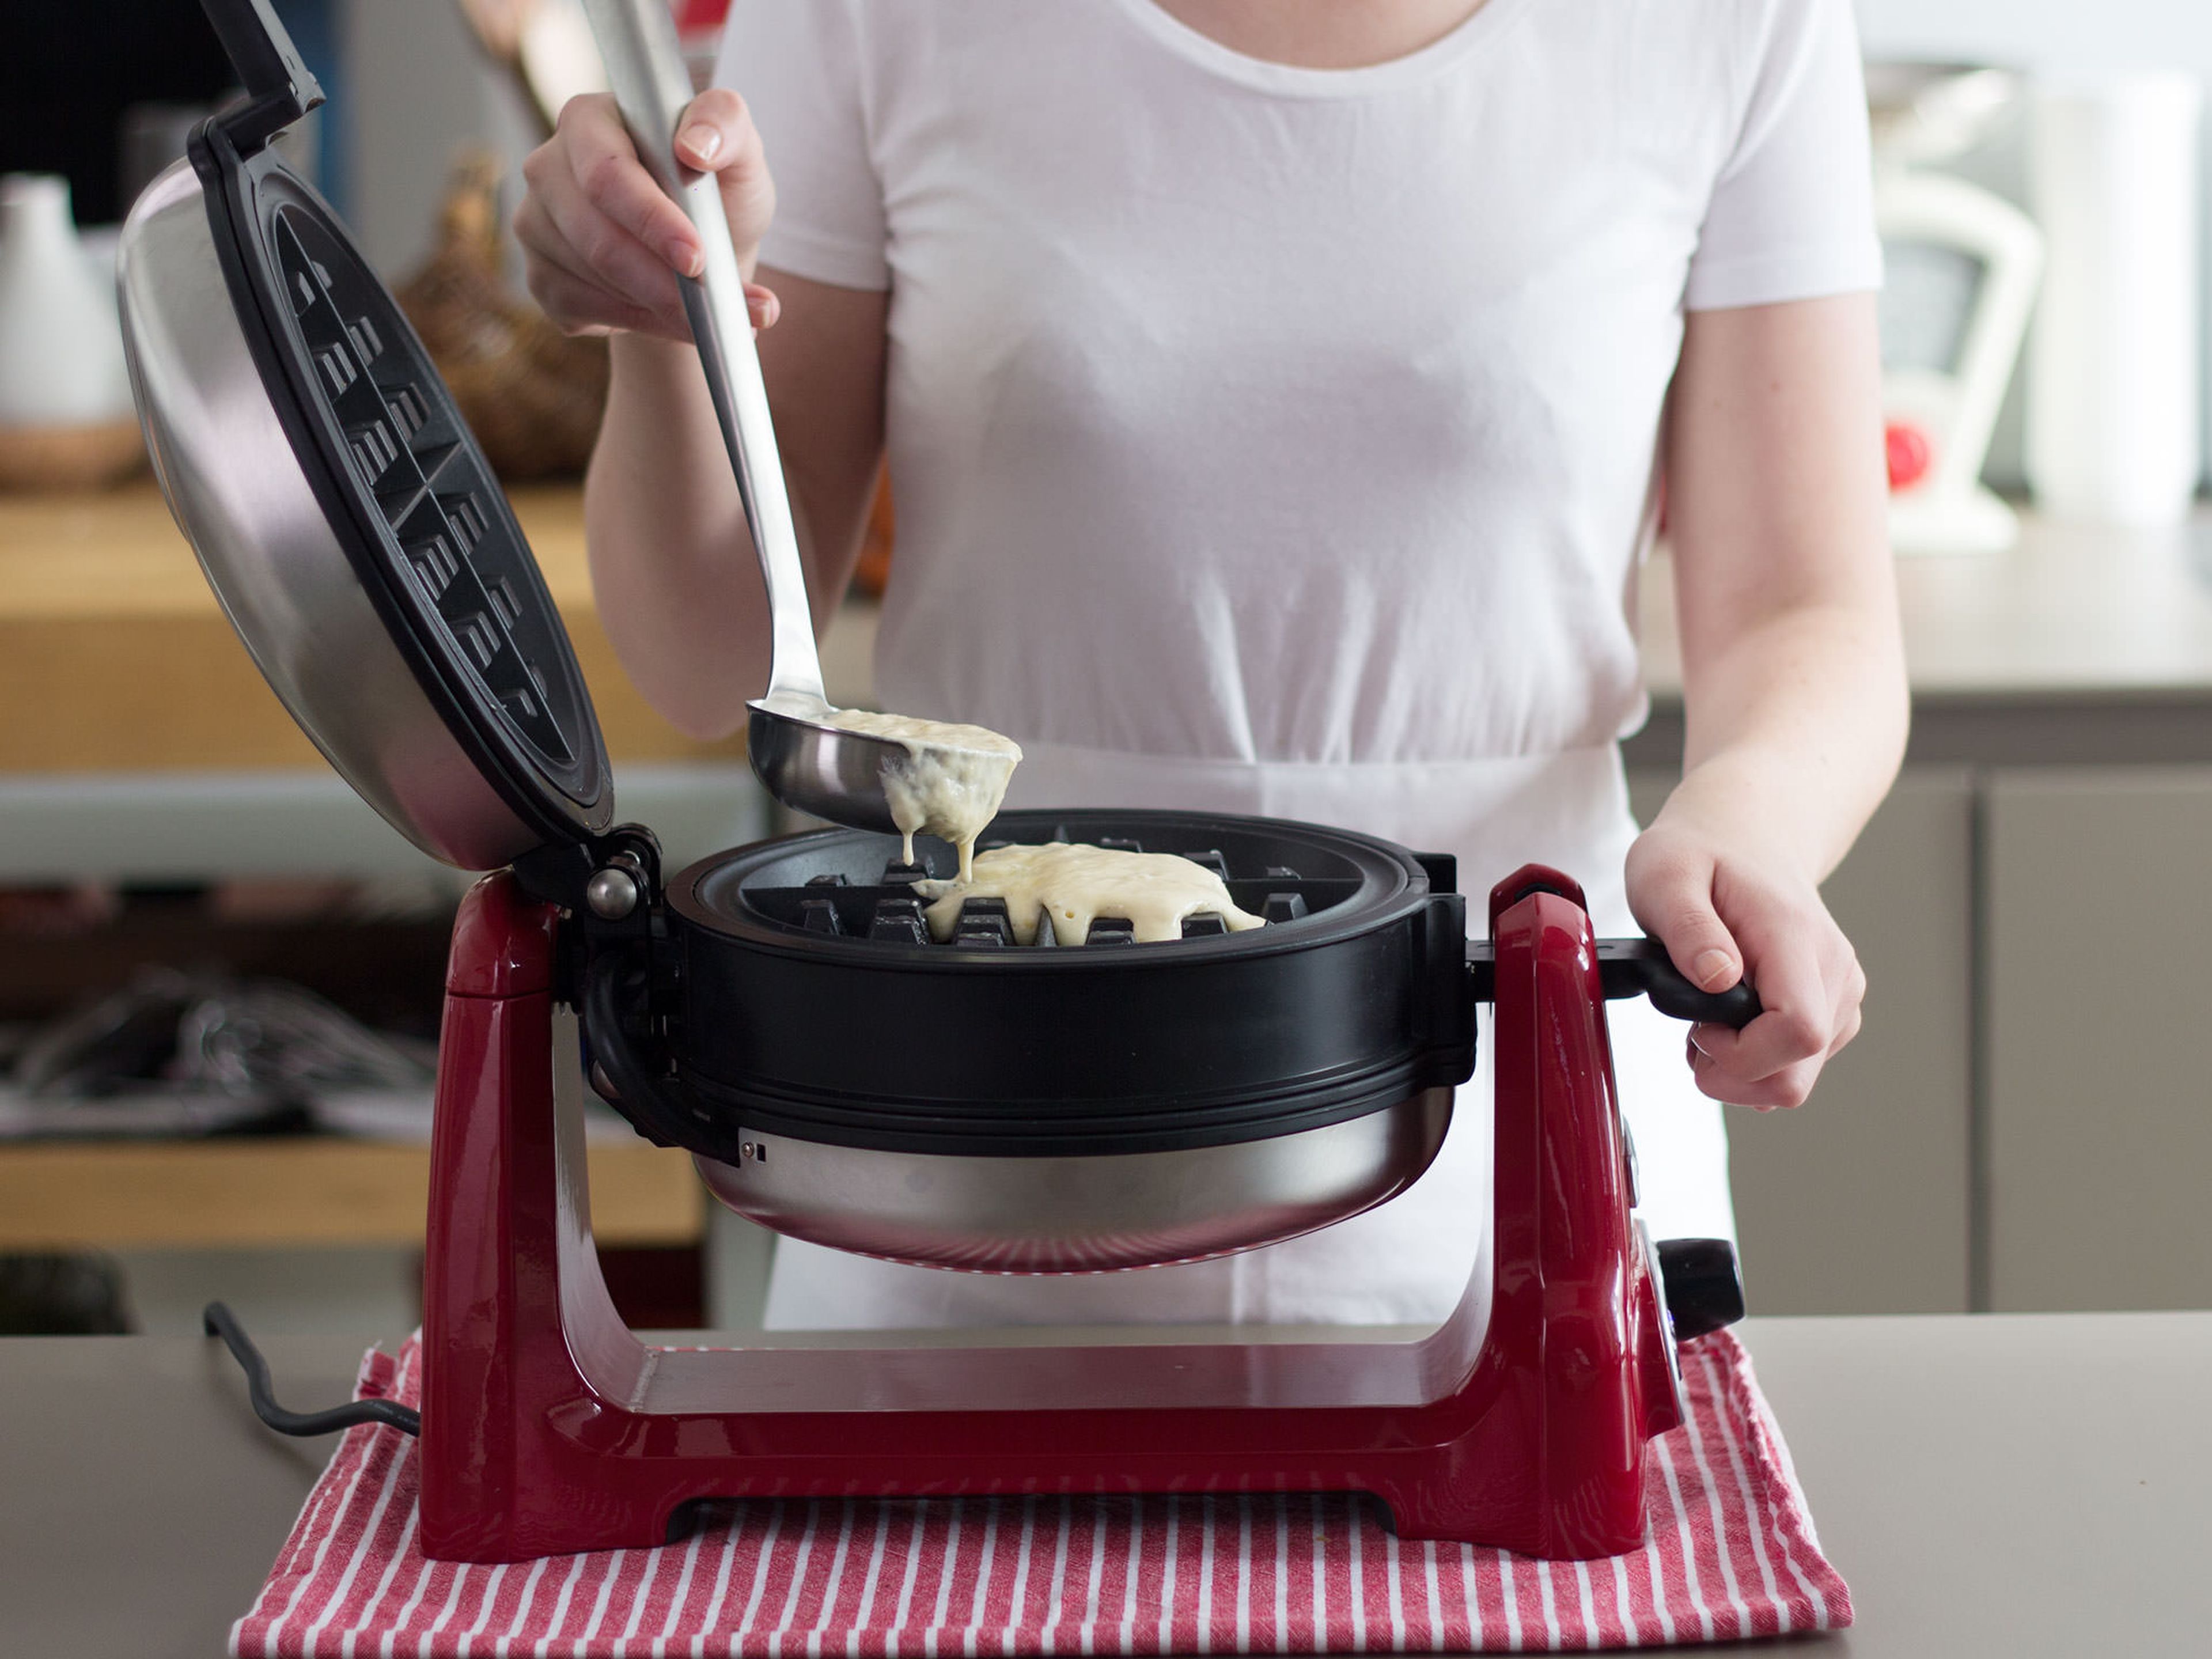 Preheat a waffle maker and grease with some butter. Pour some of the batter into waffle maker and cook for approx. 3 – 4 min. or until golden brown. Serve straightaway with blueberry sauce. Garnish with confectioner’s sugar, if desired.